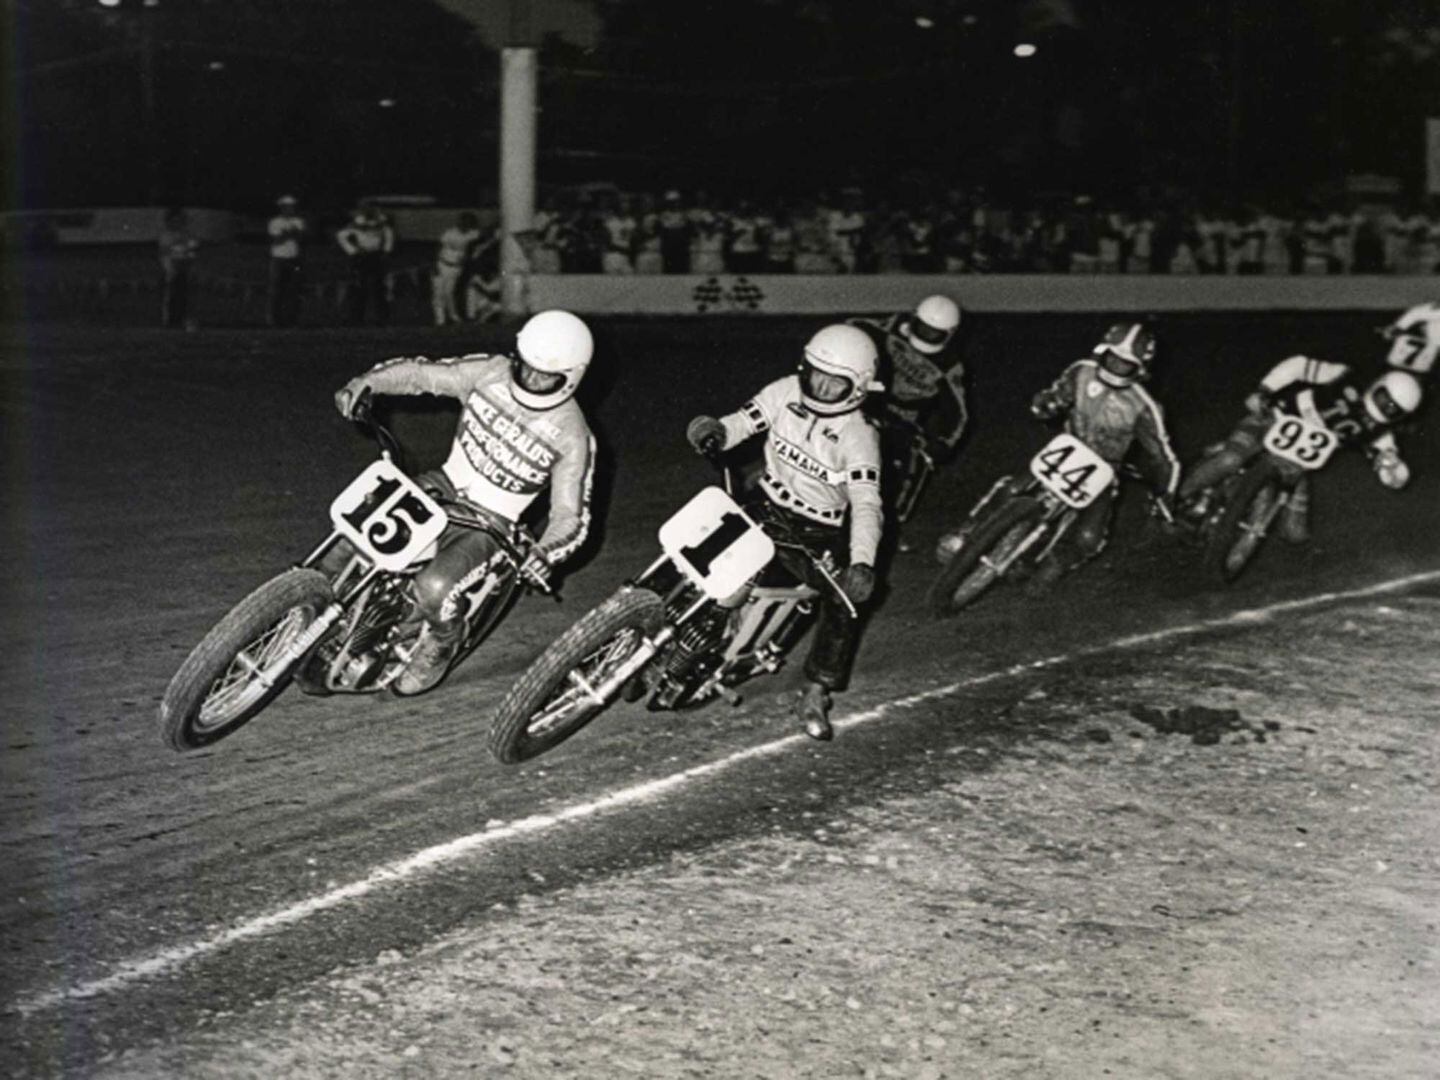 Flat-track racing has led many riders to success in roadracing, including King Kenny Roberts.